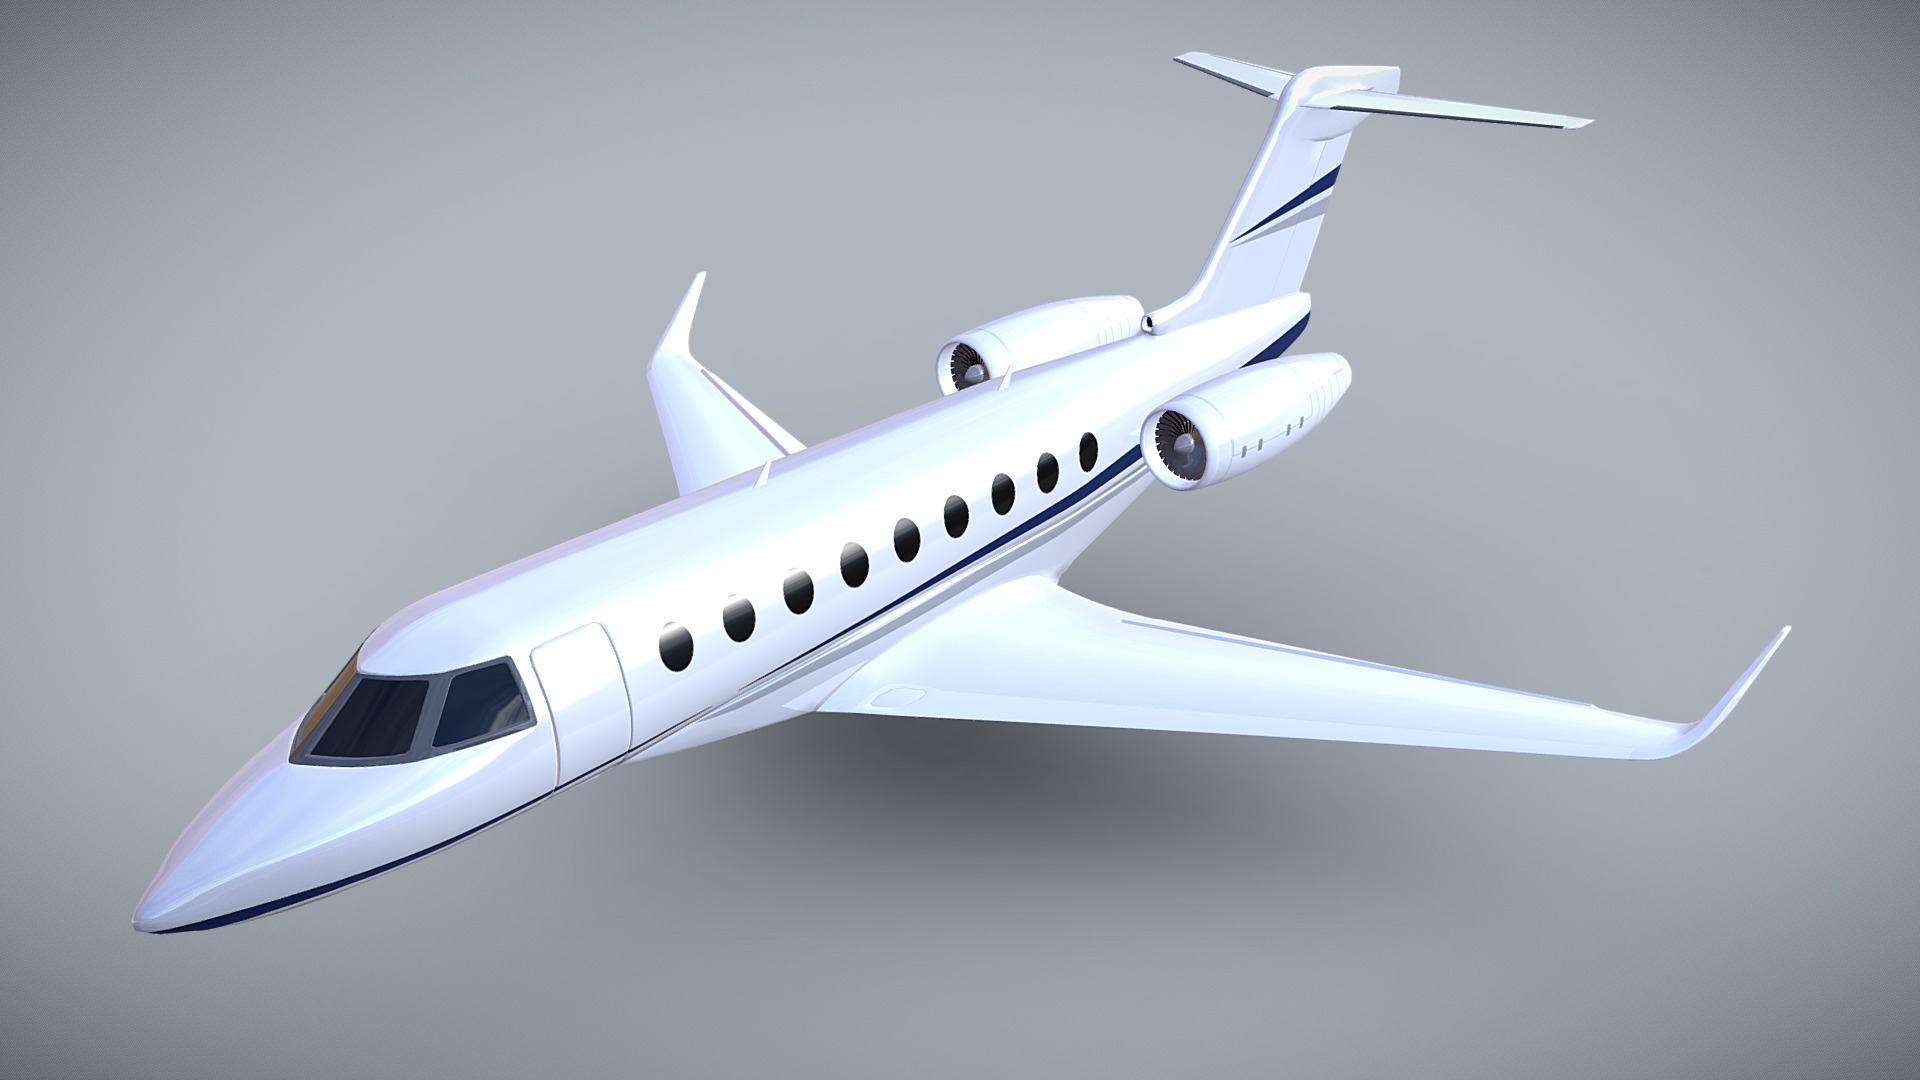 3D model Gulfstream G280 private jet - This is a 3D model of the Gulfstream G280 private jet. The 3D model is about a white and blue airplane.